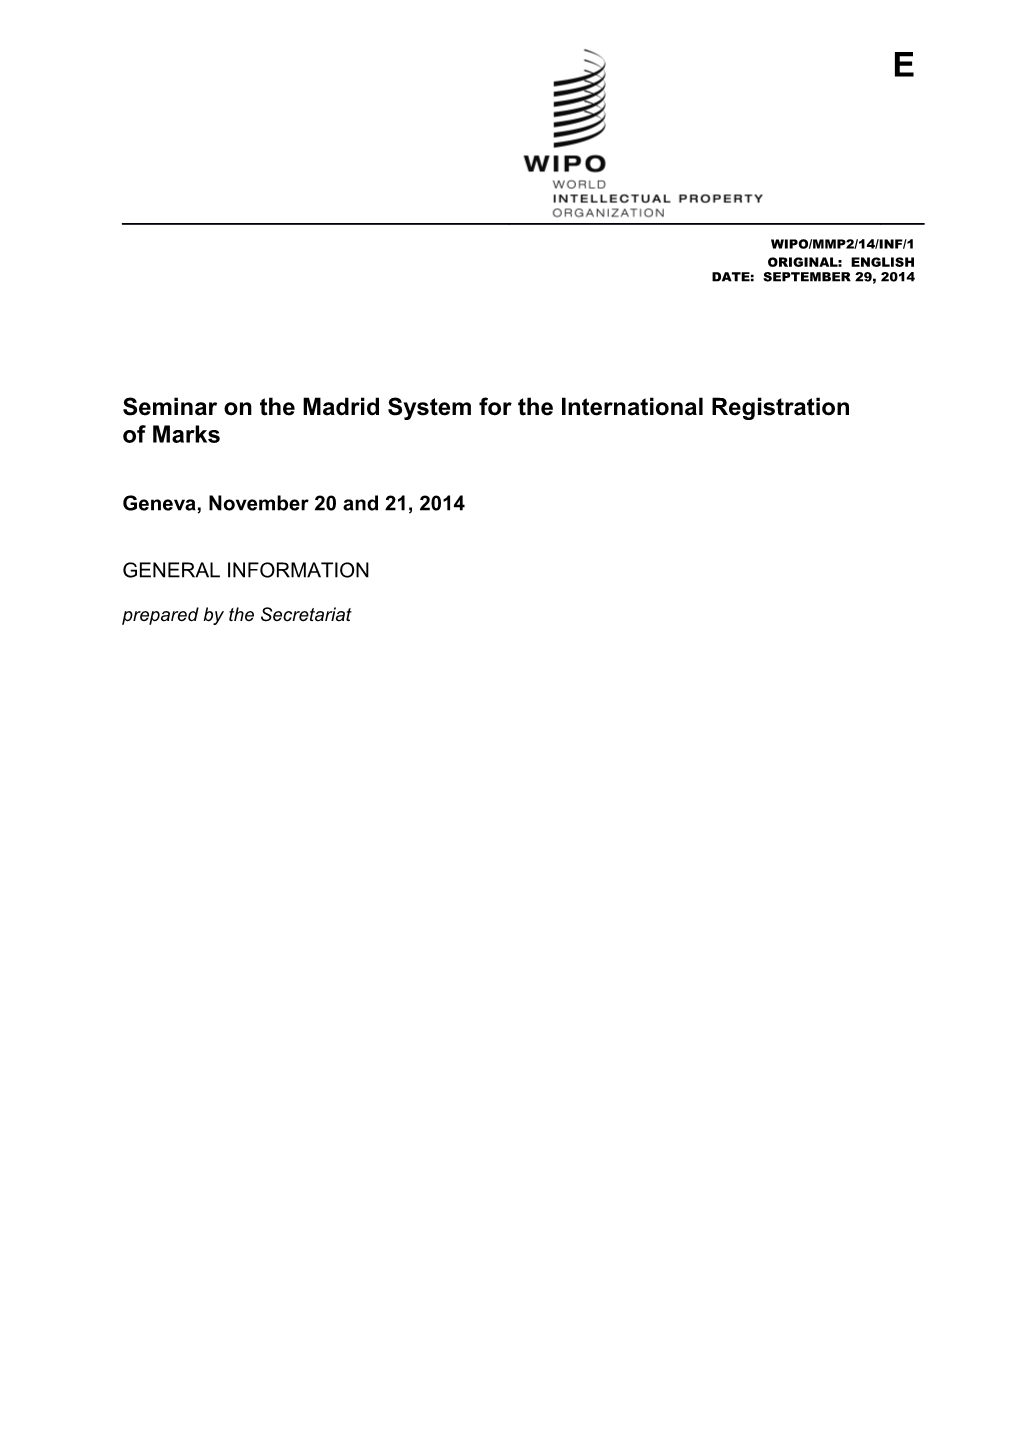 Seminar on the Madrid System for the International Registration of Marks